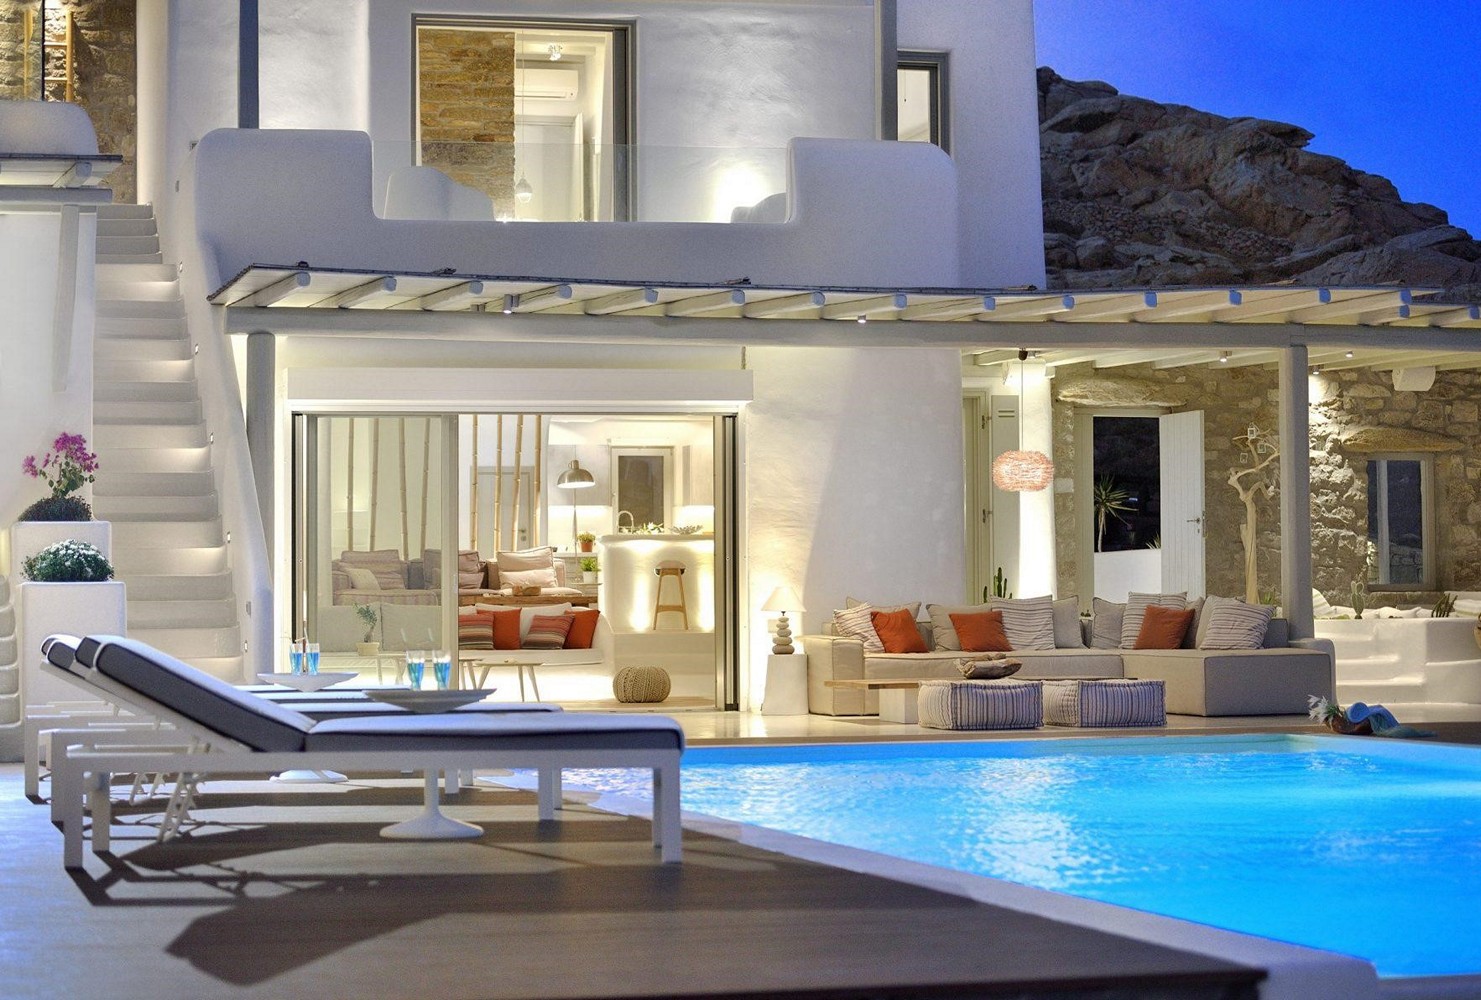 Pool and beds in front of the villa on Mykonos